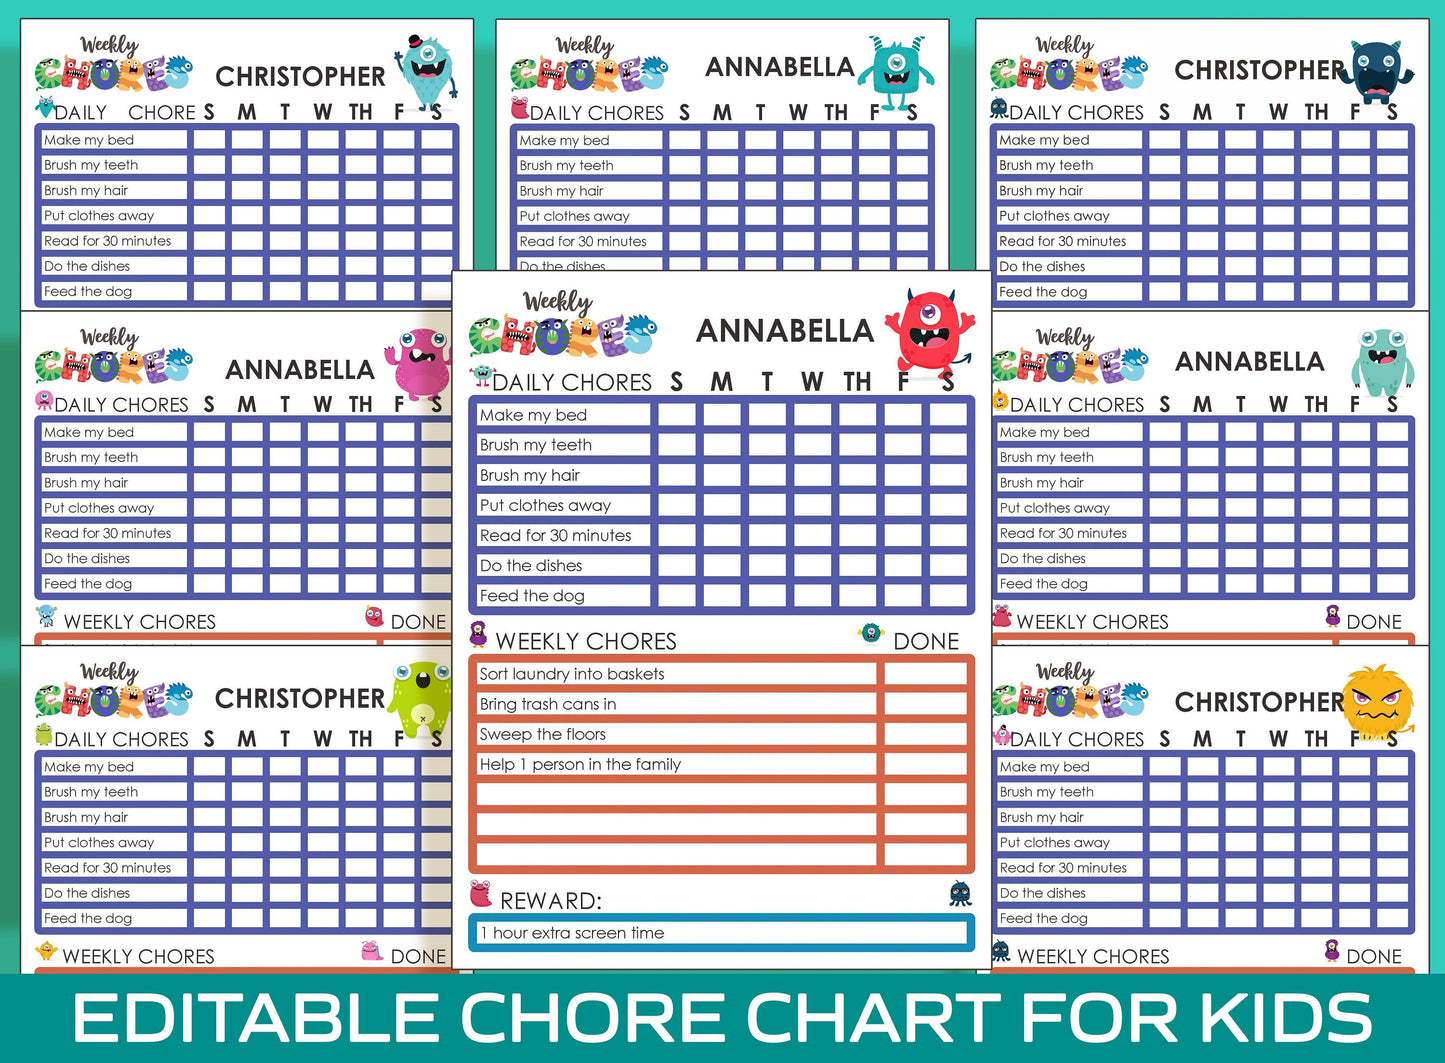 Monster Chore Chart for Kids, Printable/Editable Chore Chart for Kids, Child Responsibility, Boys & Girls To Do List, Reward Chart, Routine